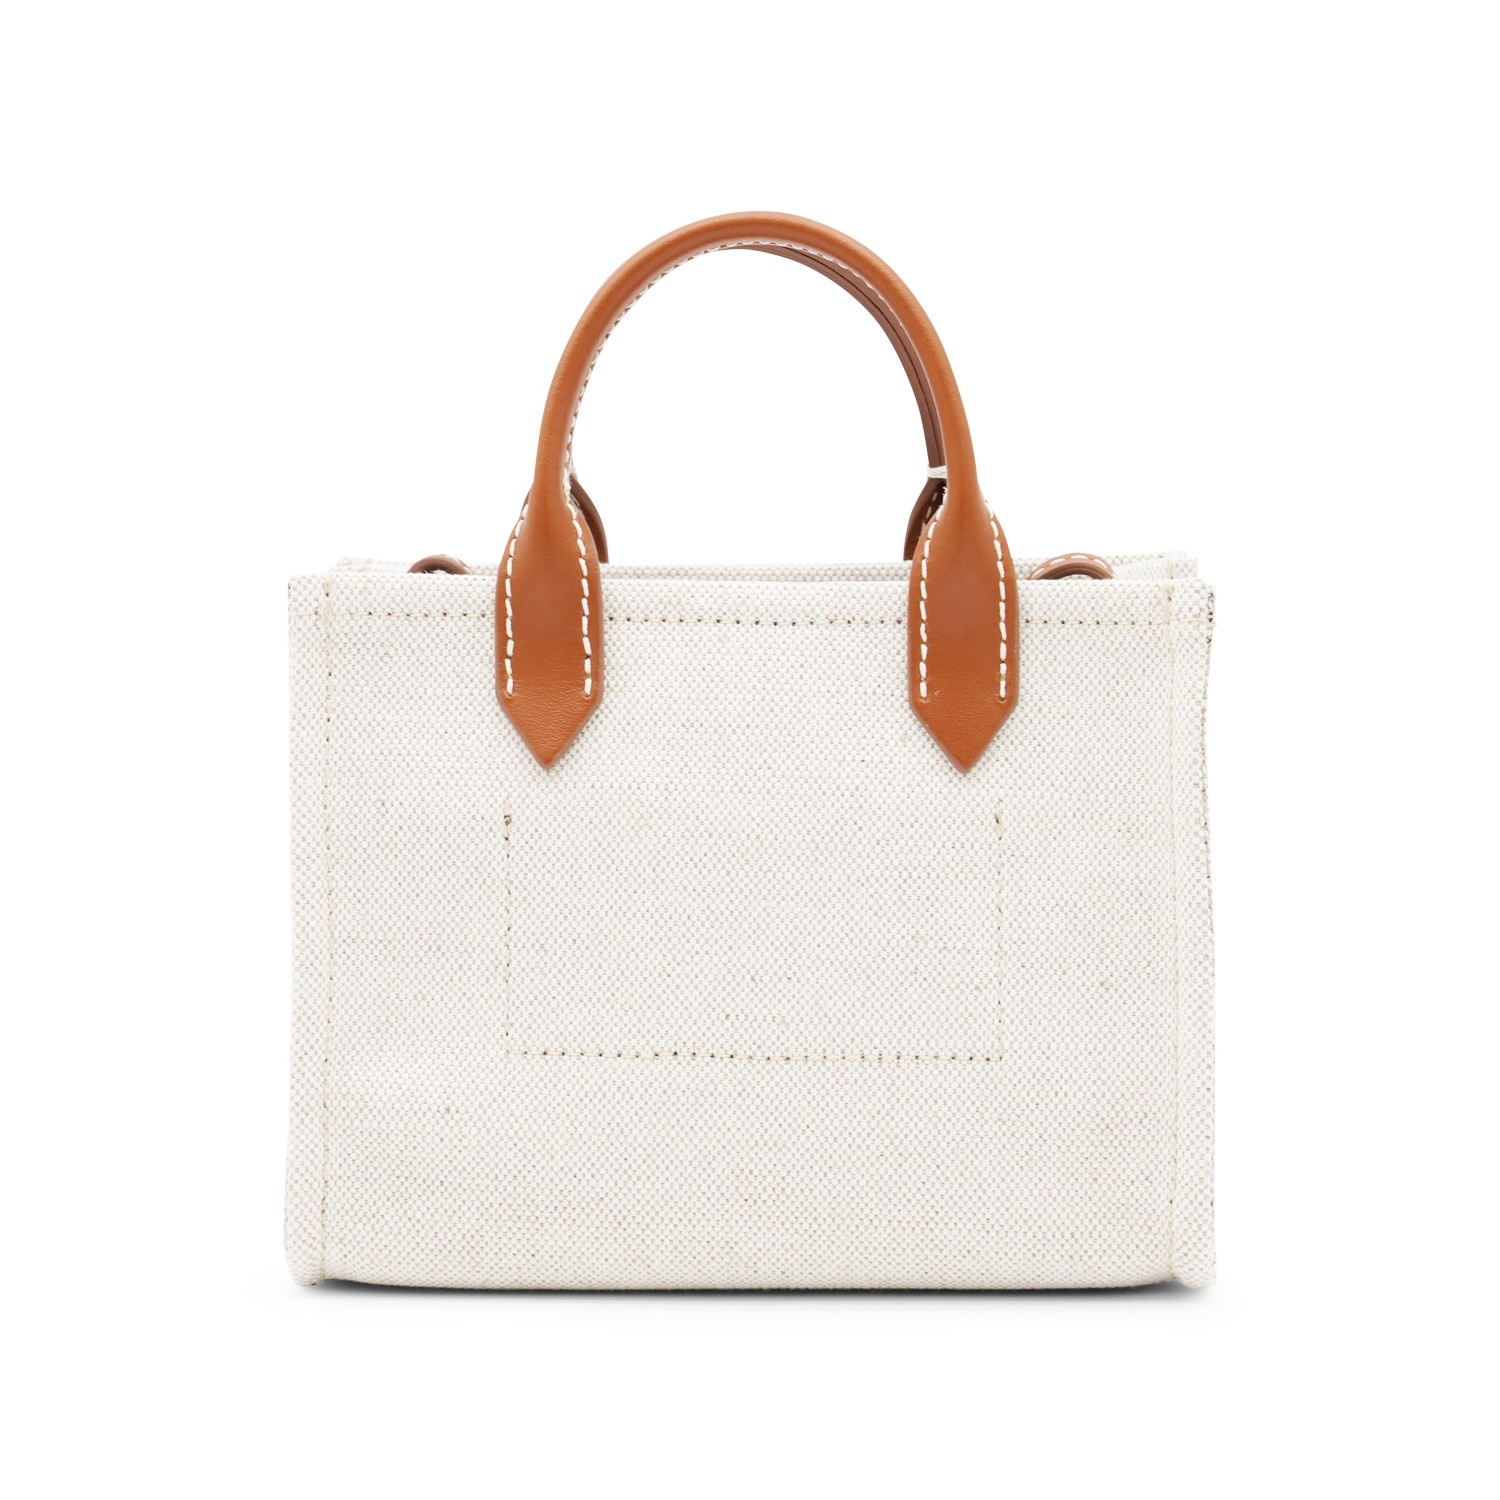 BEIGE CANVAS AND BROWN LEATHER HANDLE BAG - 3